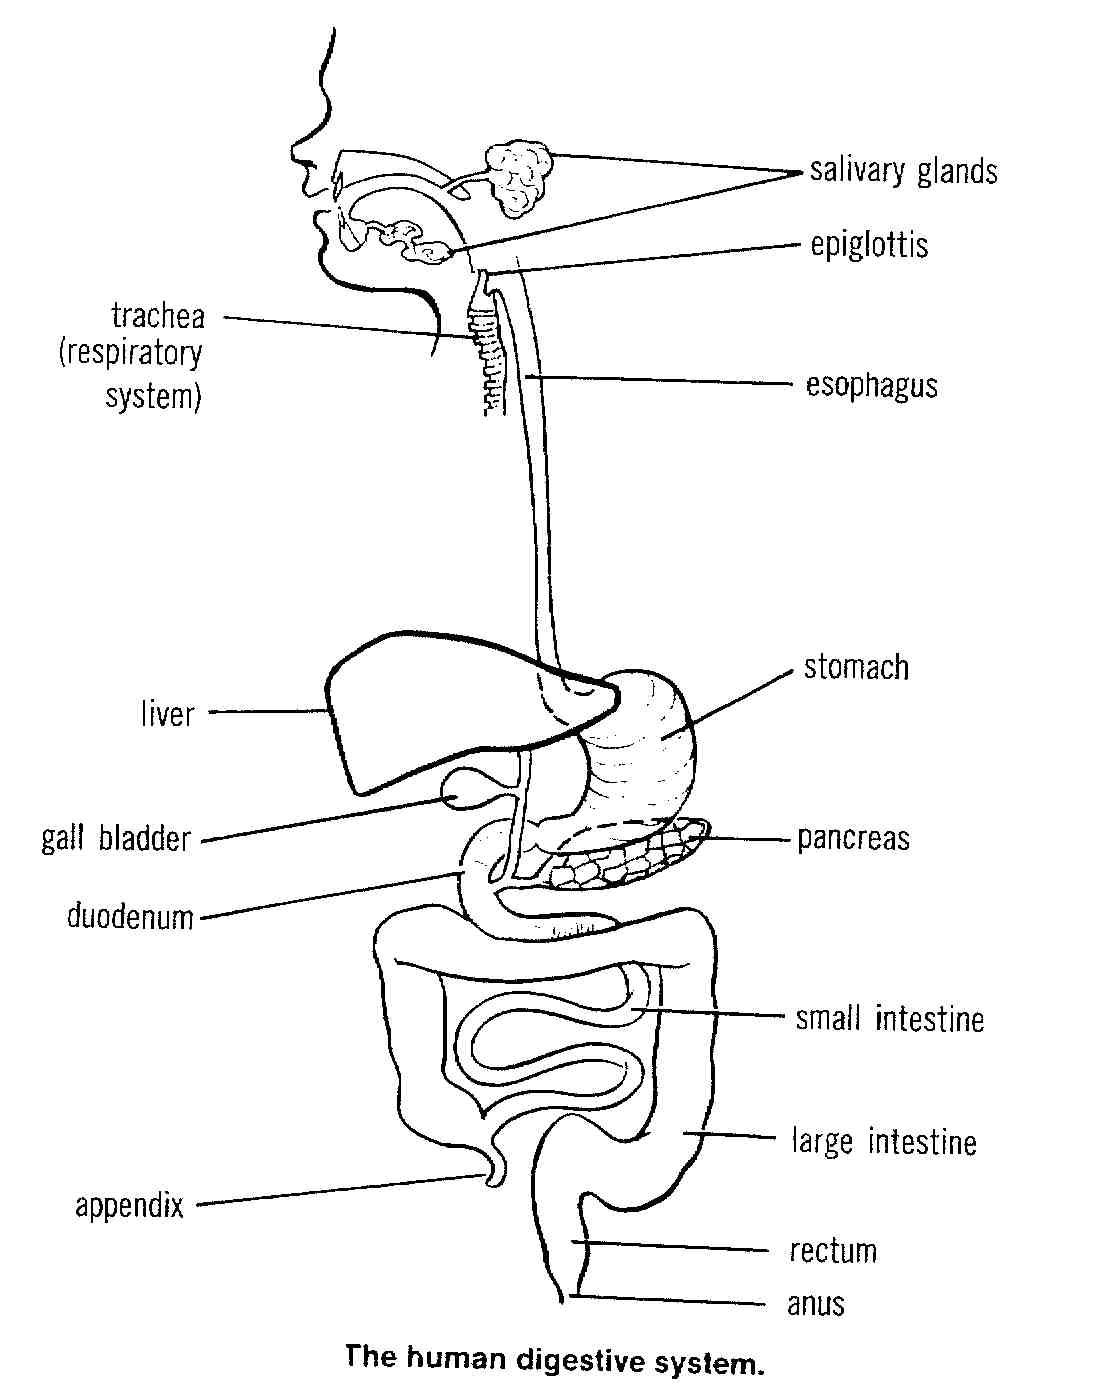 Human Digestive System Coloring Page | High Quality Coloring Pages